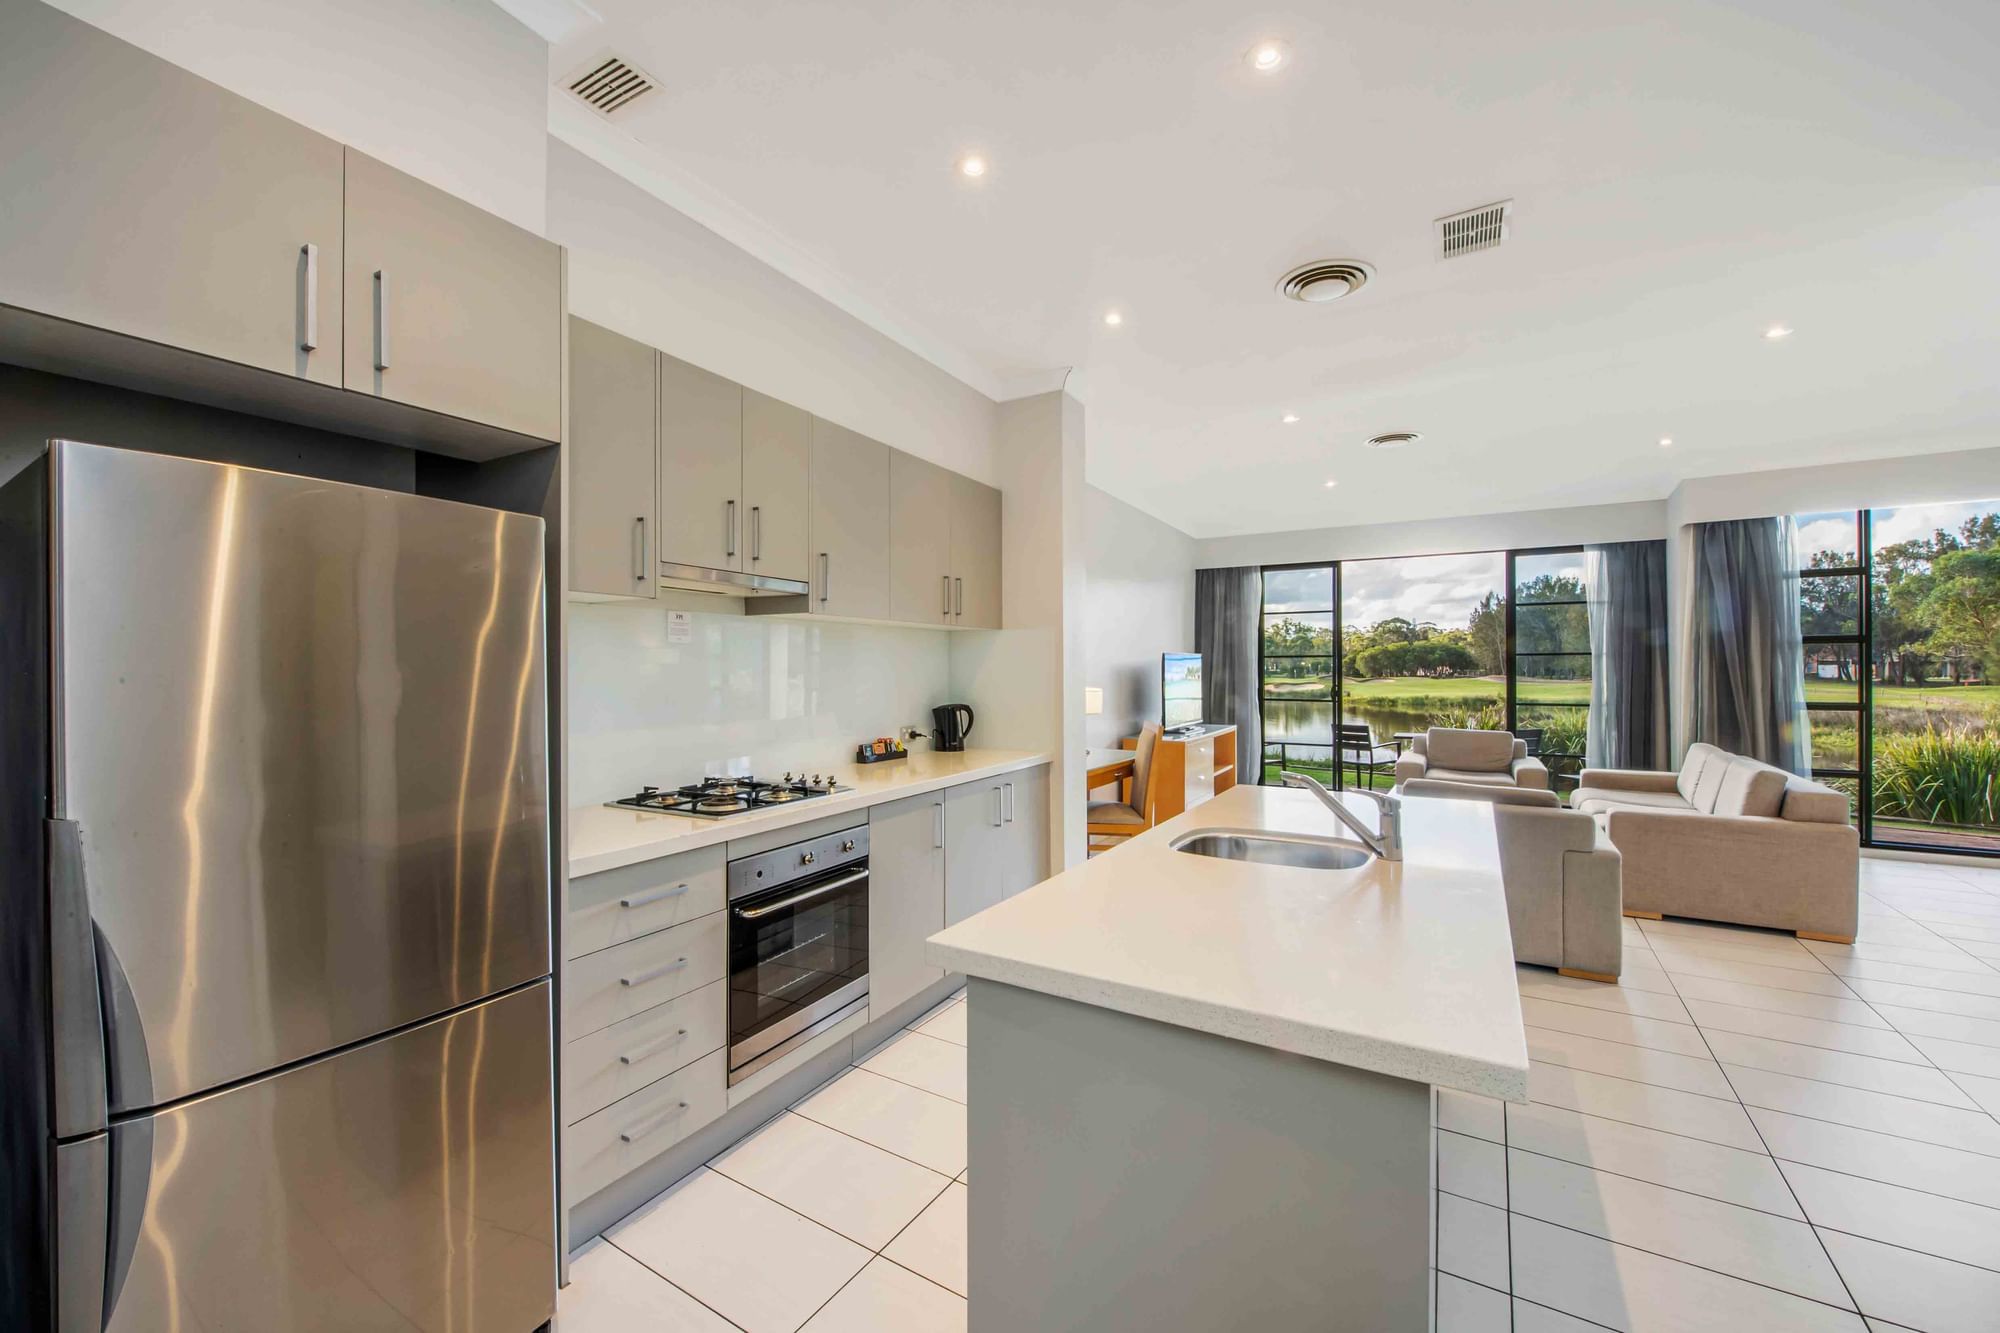 3 bedroom apartment featuring fully operating kitchen central coast